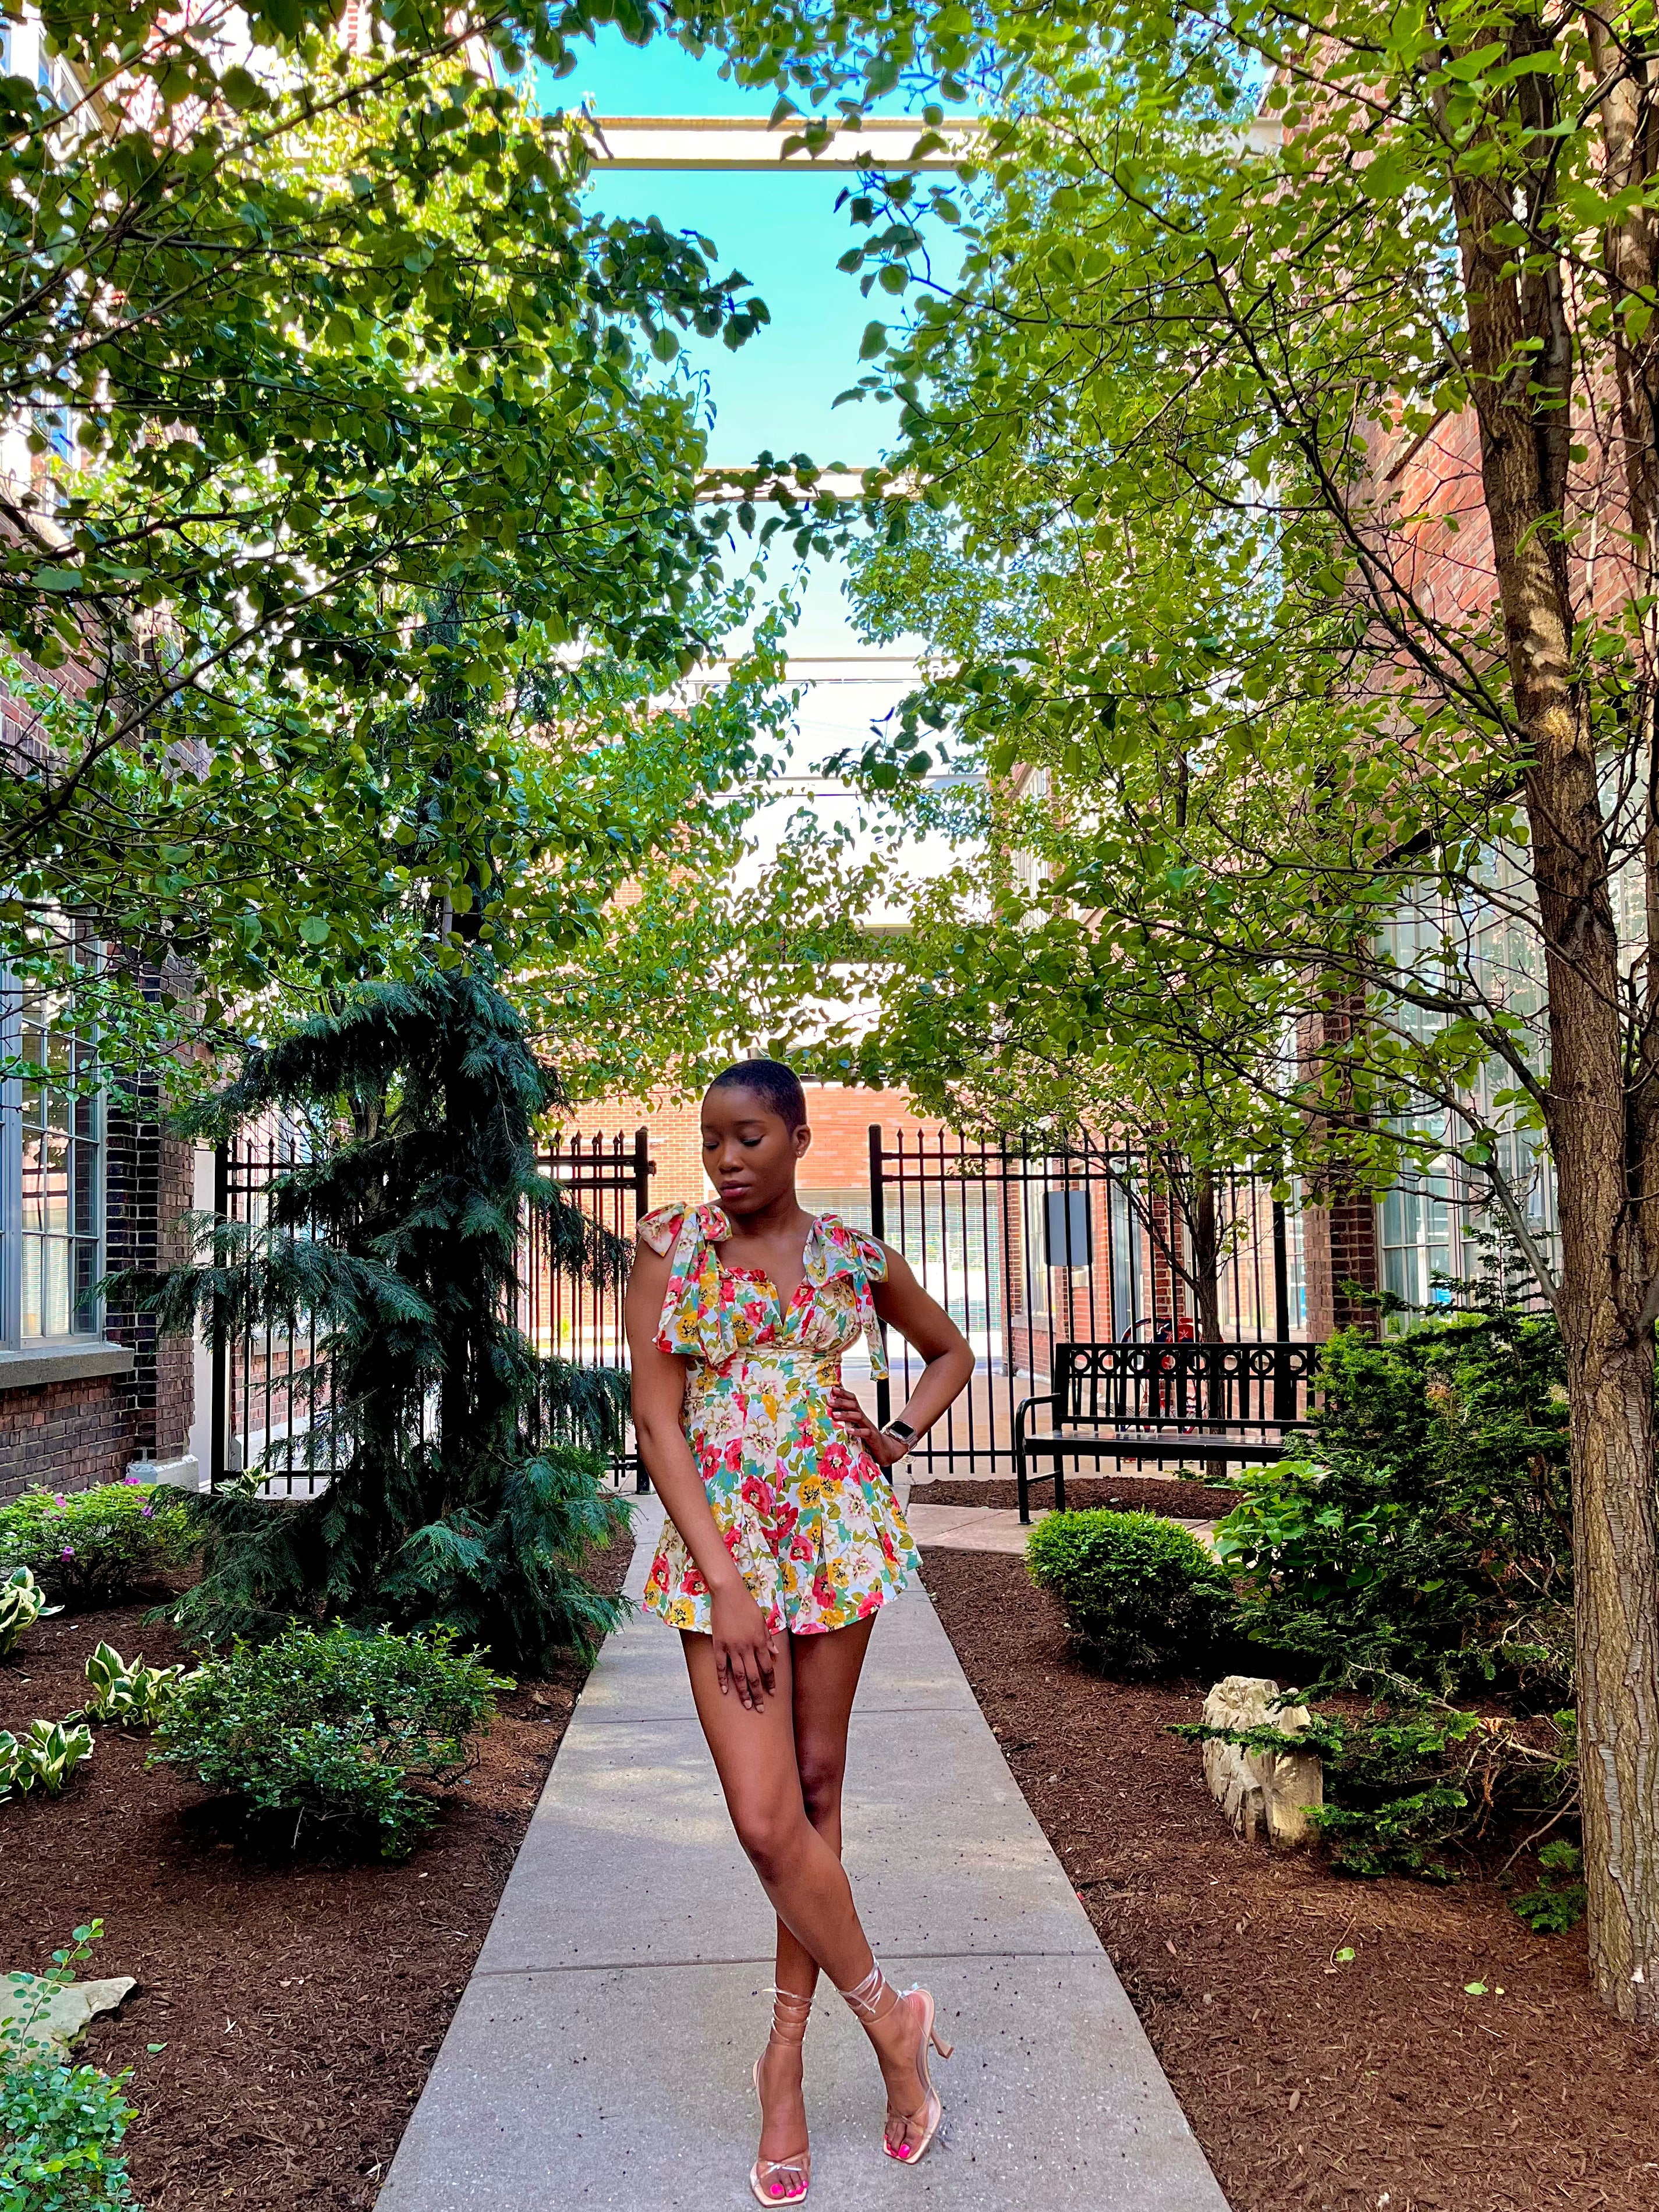 Woman with low hair cut in the middle of a pathway wearing a floral romper with tie straps and a flared pleated bottom. Woman is wearing strappy tie up heels